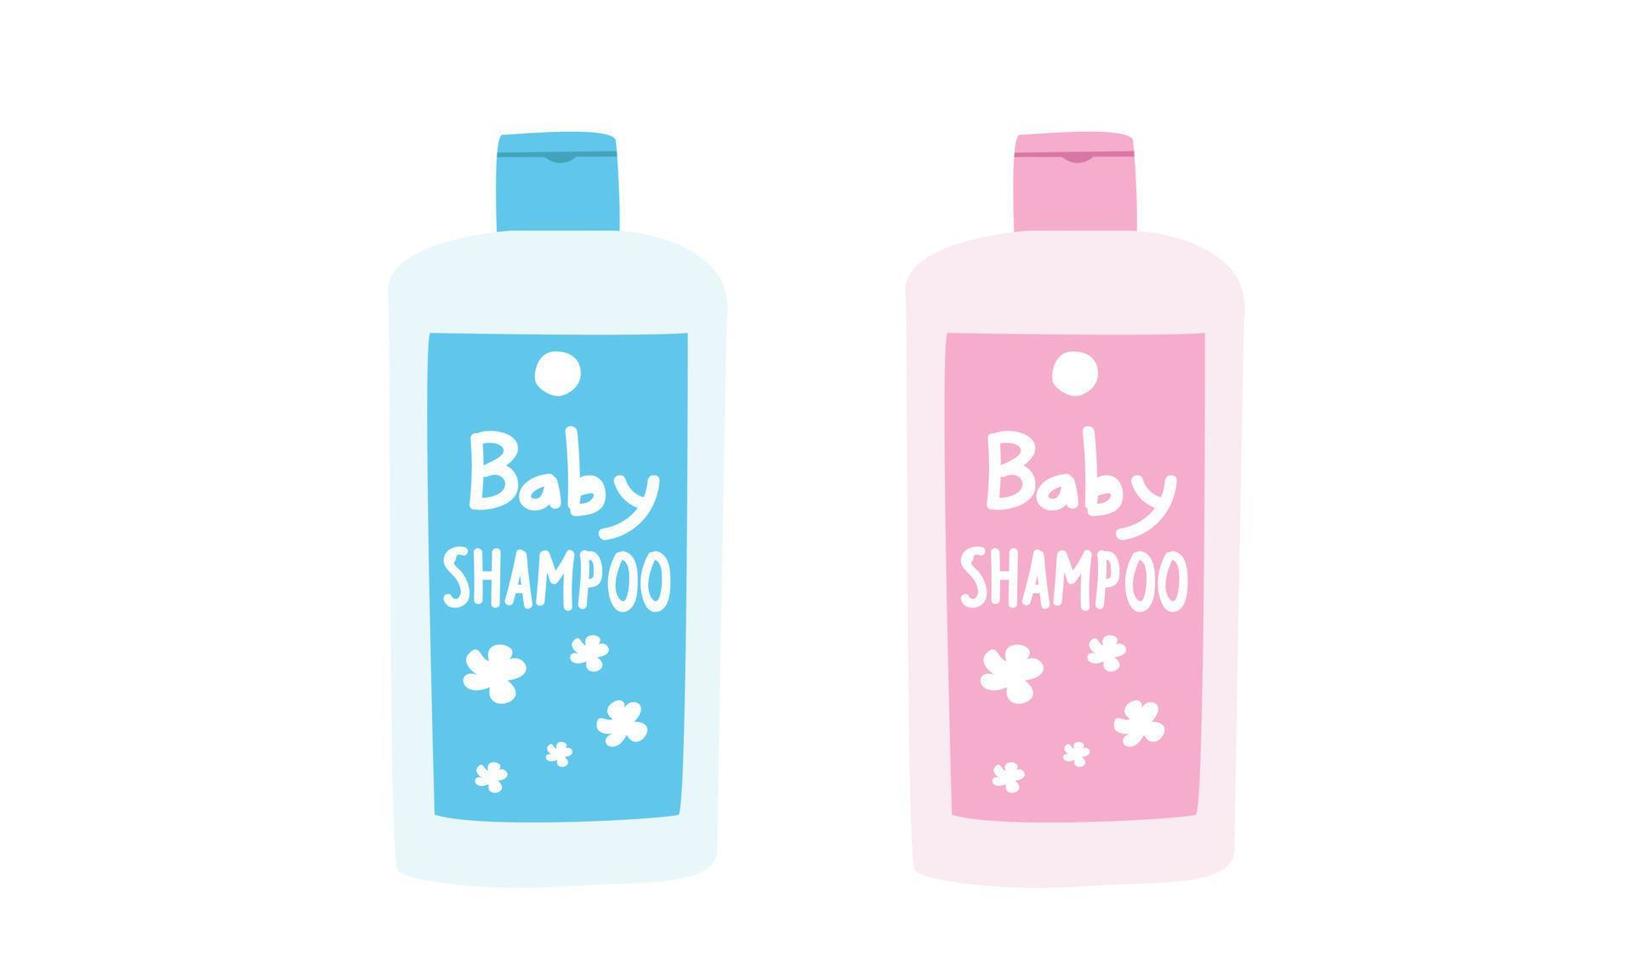 Baby shampoo bottle clipart. Simple cute blue and pink bottles of baby shampoo, shower gel, lotion, body milk package flat vector illustration. Plastic bottles of baby cosmetic products cartoon style